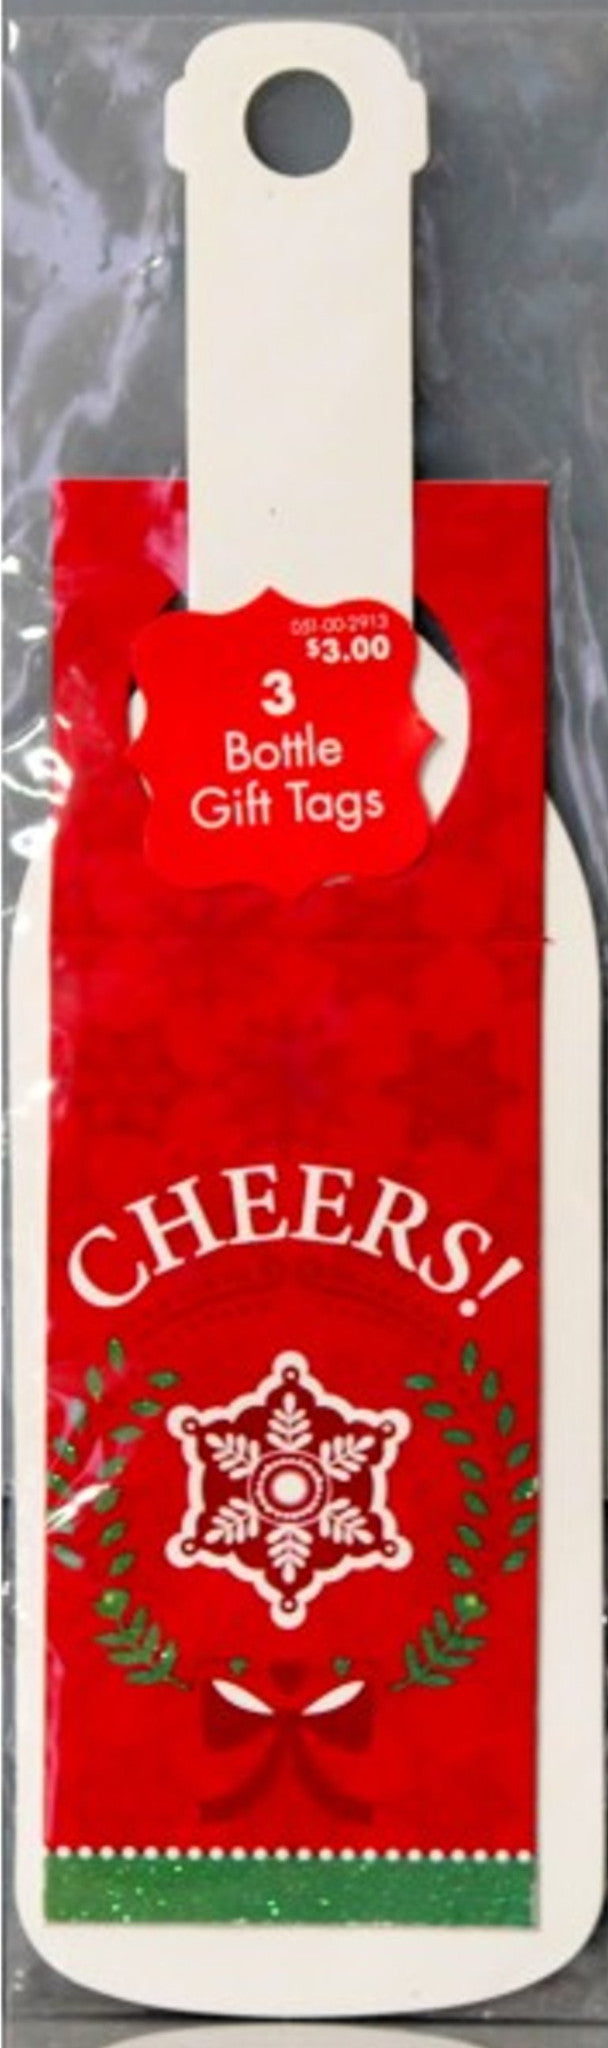 Magic Paper Group, Inc. Christmas Holiday Cheers Bottle Gift Tags - SCRAPBOOKFARE